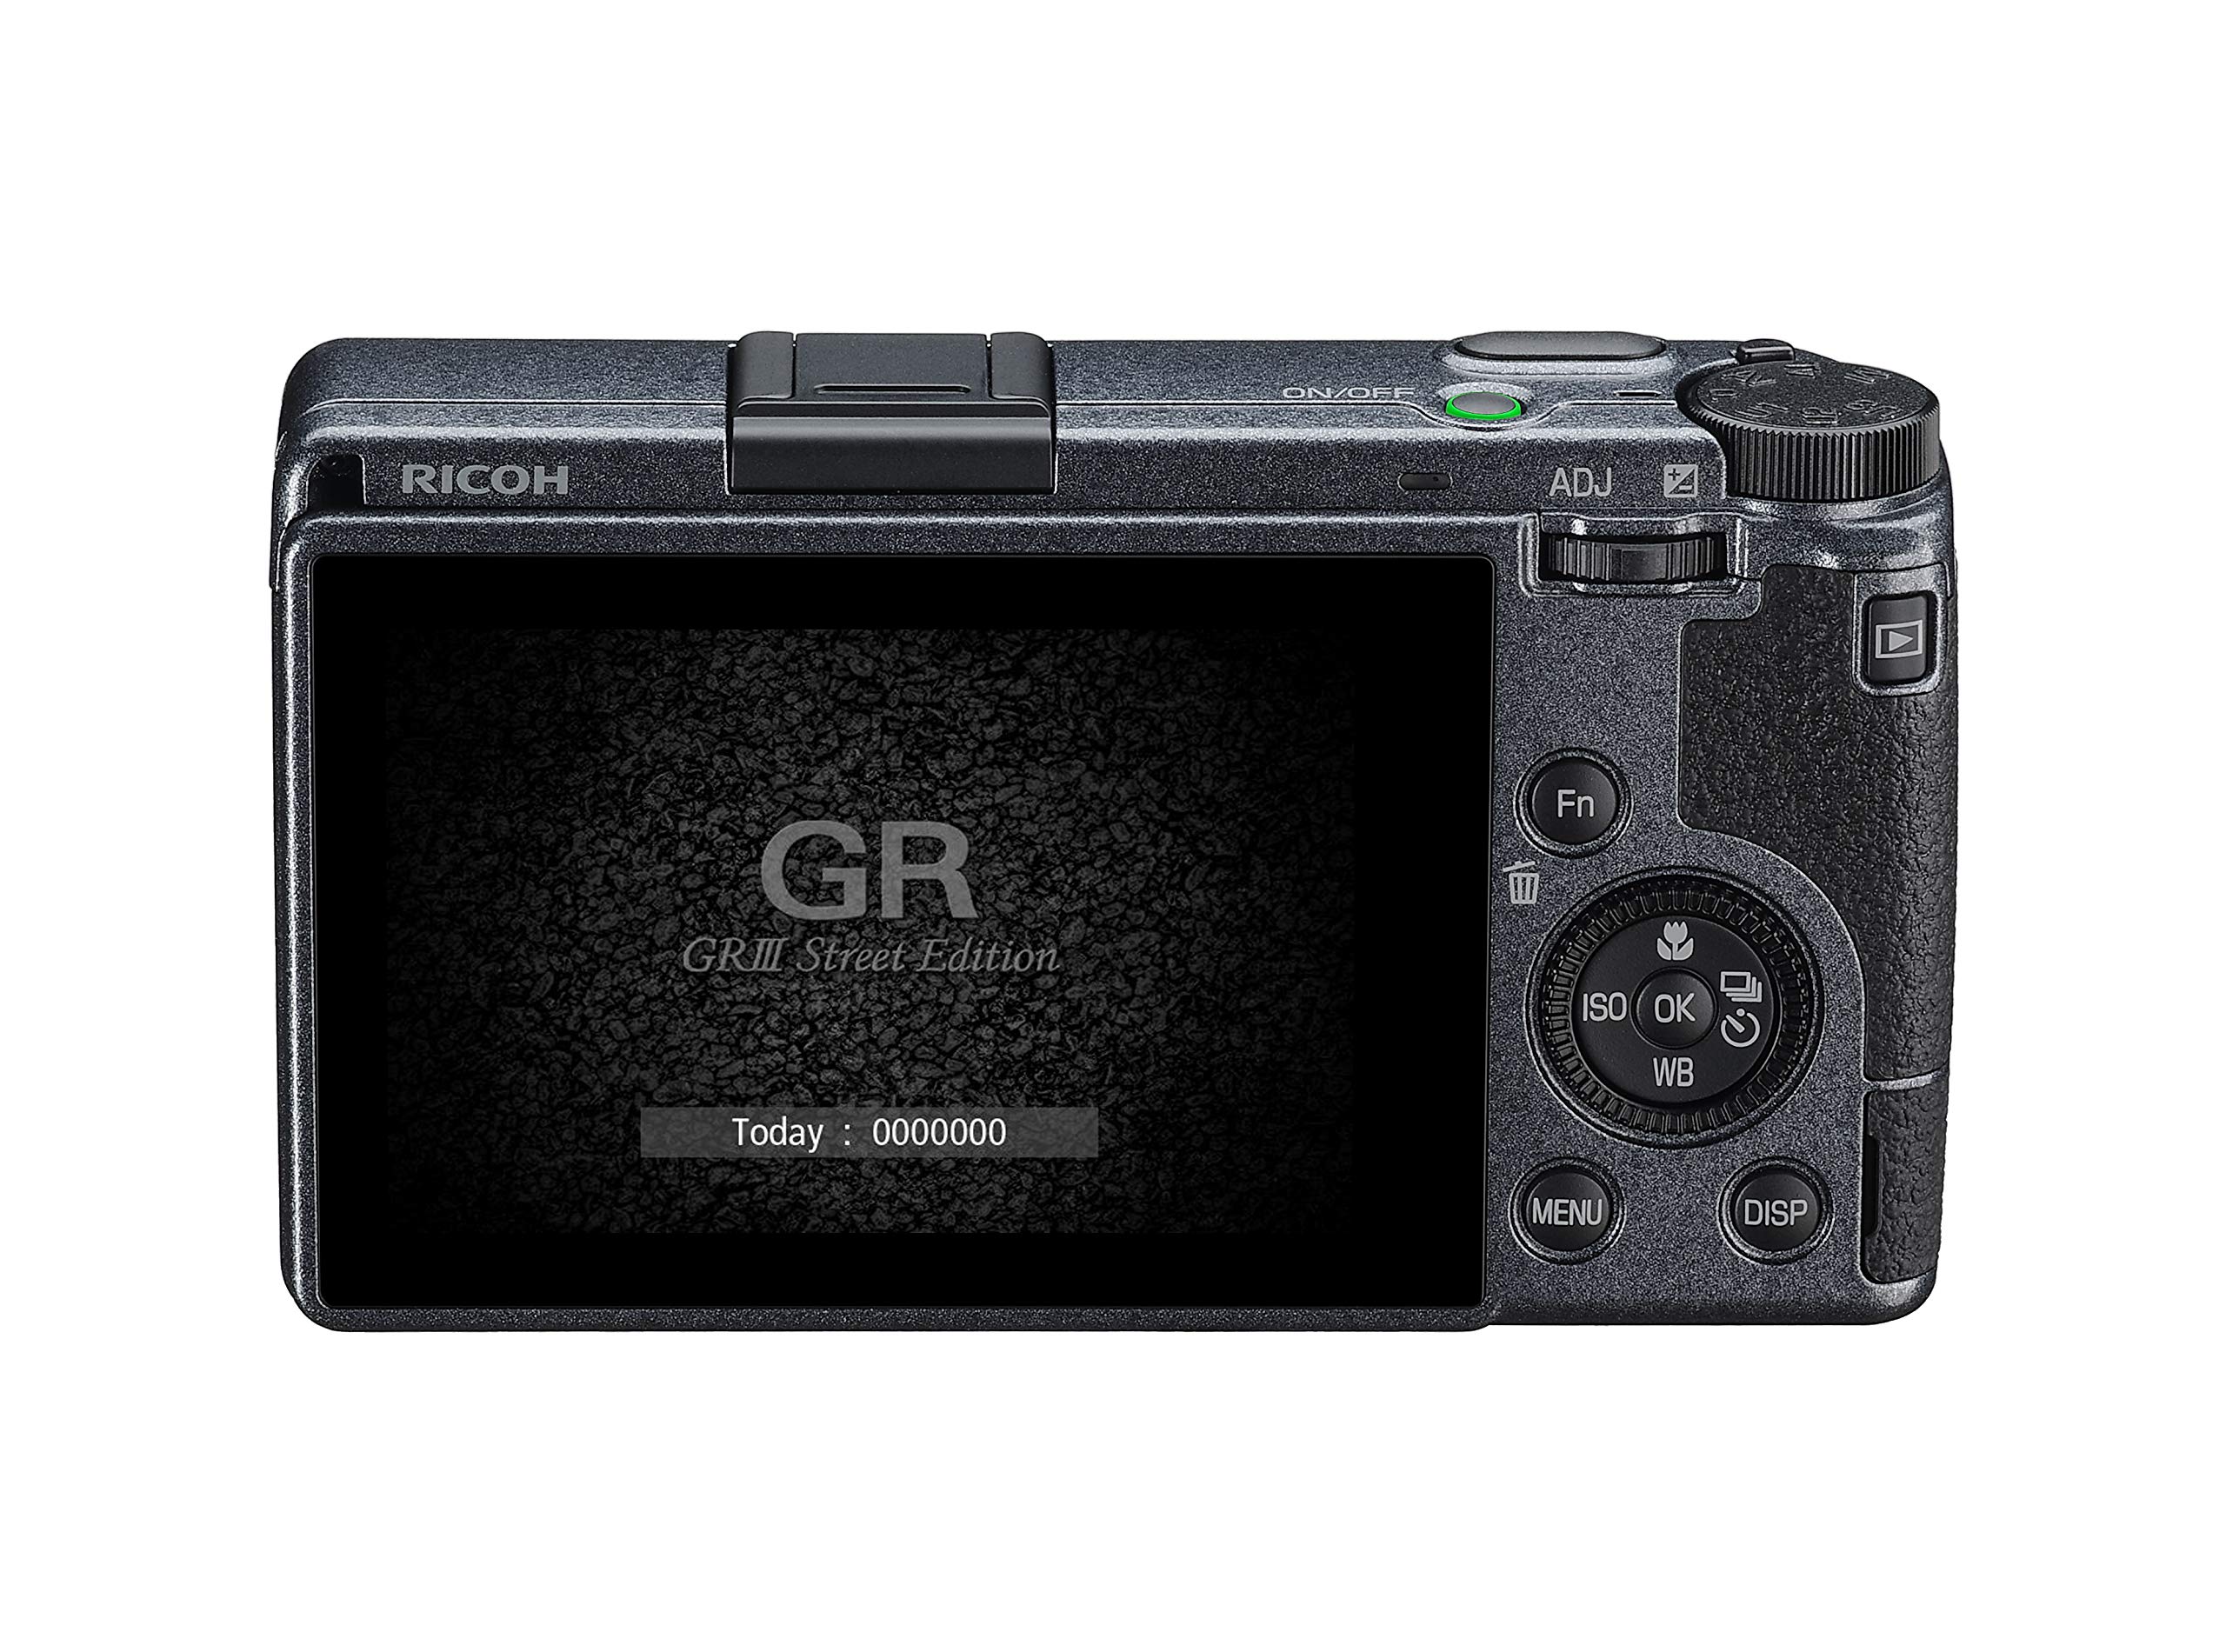 Ricoh GR III Street Edition Metallic Gray APS-C Size Digital Camera (2 batteries included) with Large CMOS Sensor GR Lens that Achieves High Resolution and High Constrast